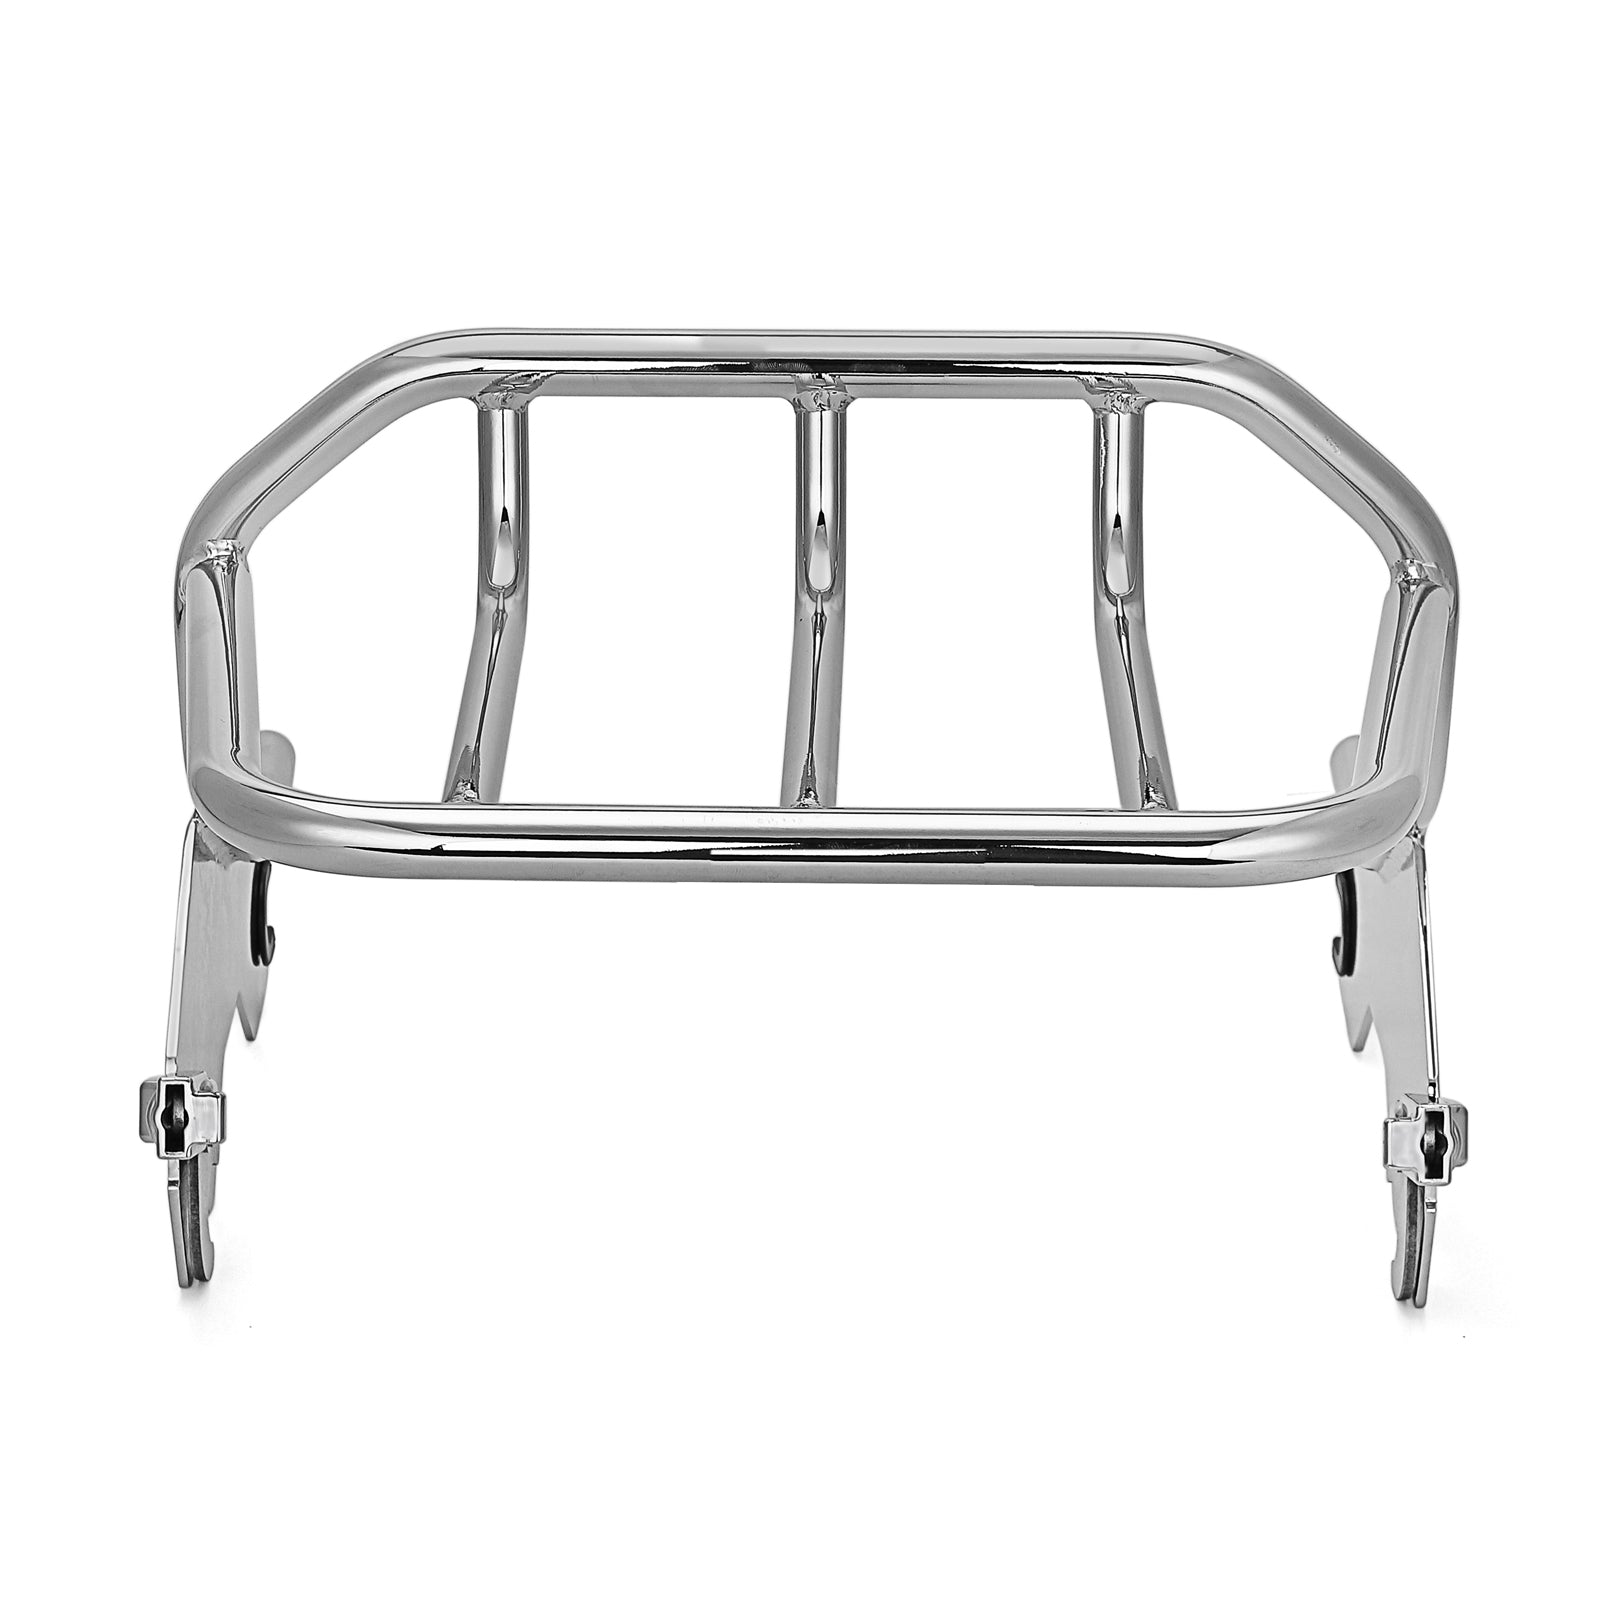 18-21 Harley Sport Glide Low Rider Chrome Low-profile Two-up Luggage Rack